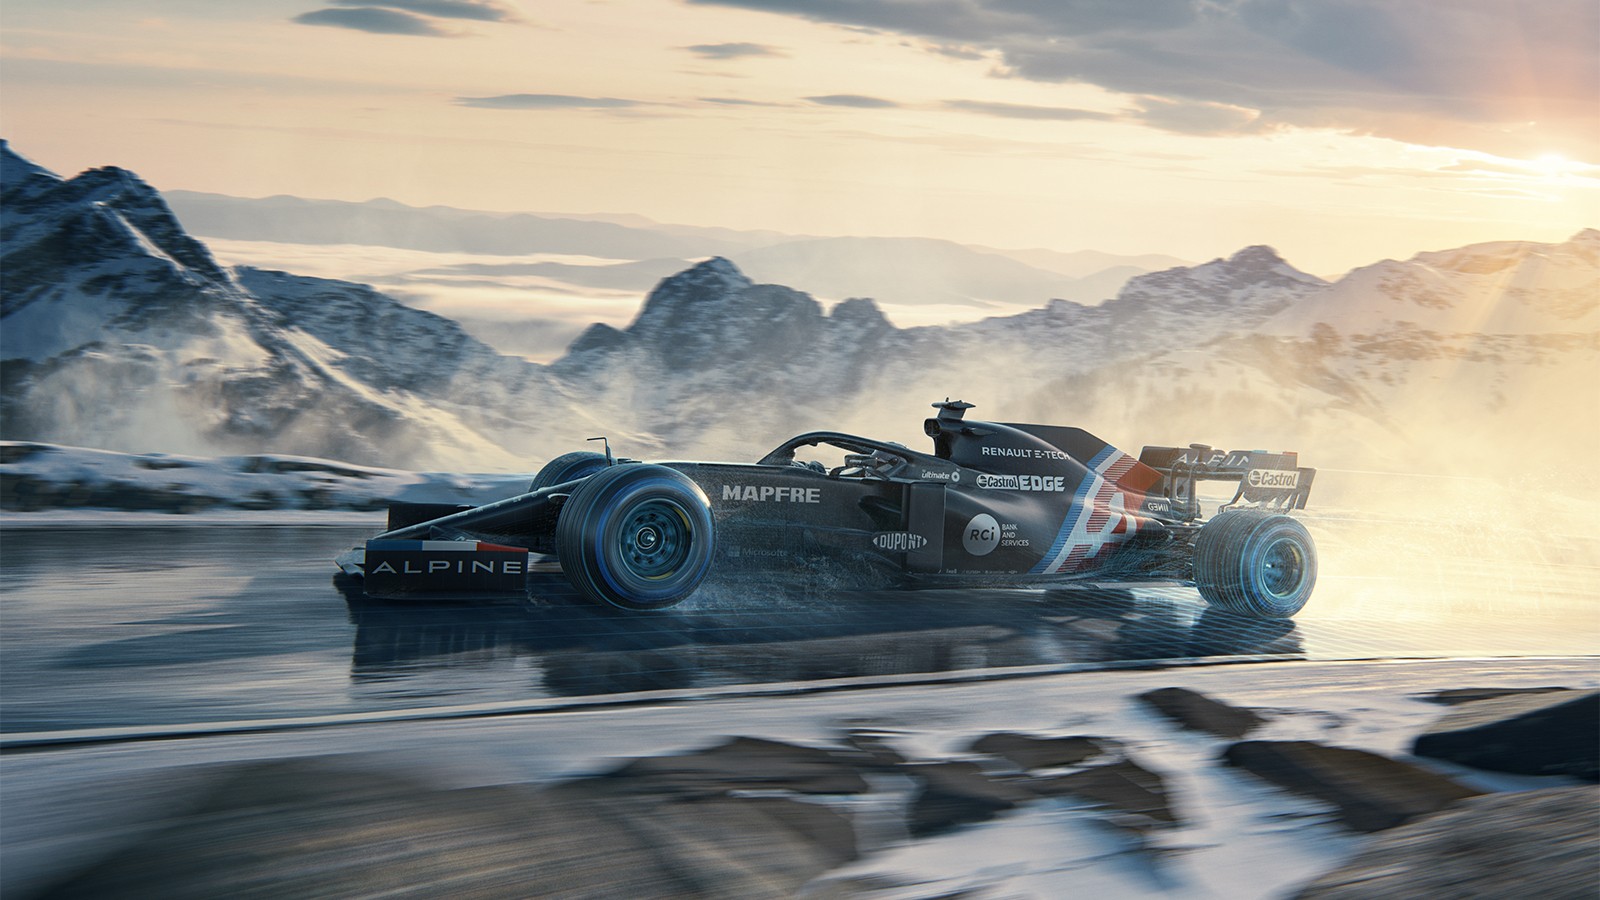 Alpine Set Date To Launch The Team S First F1 Car After Rebranding